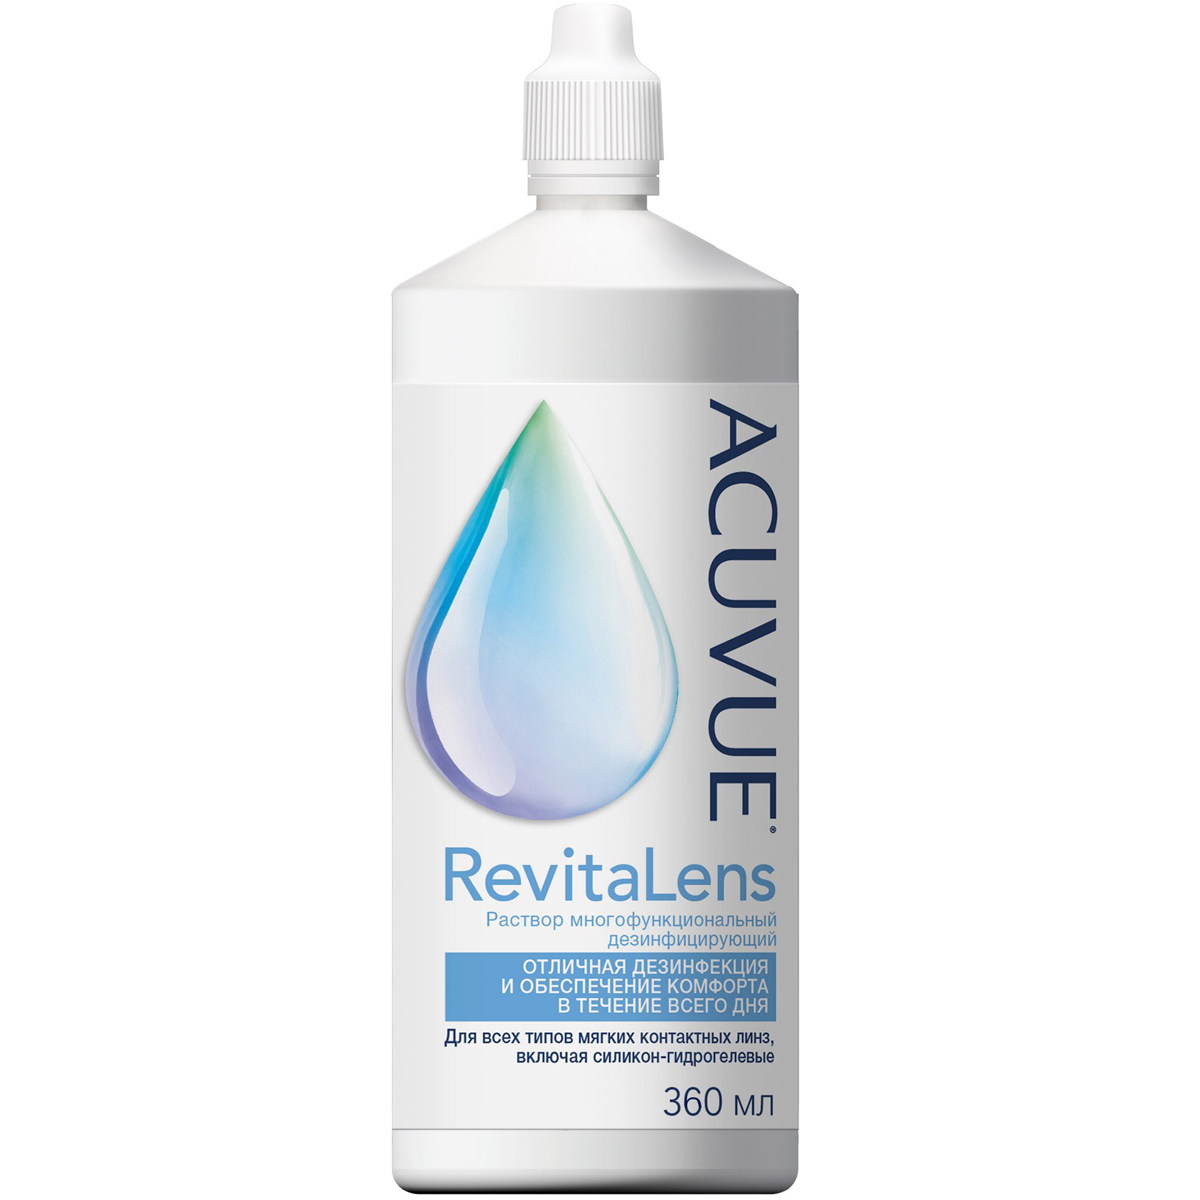 Acuvue RevitaLens 360 мл.